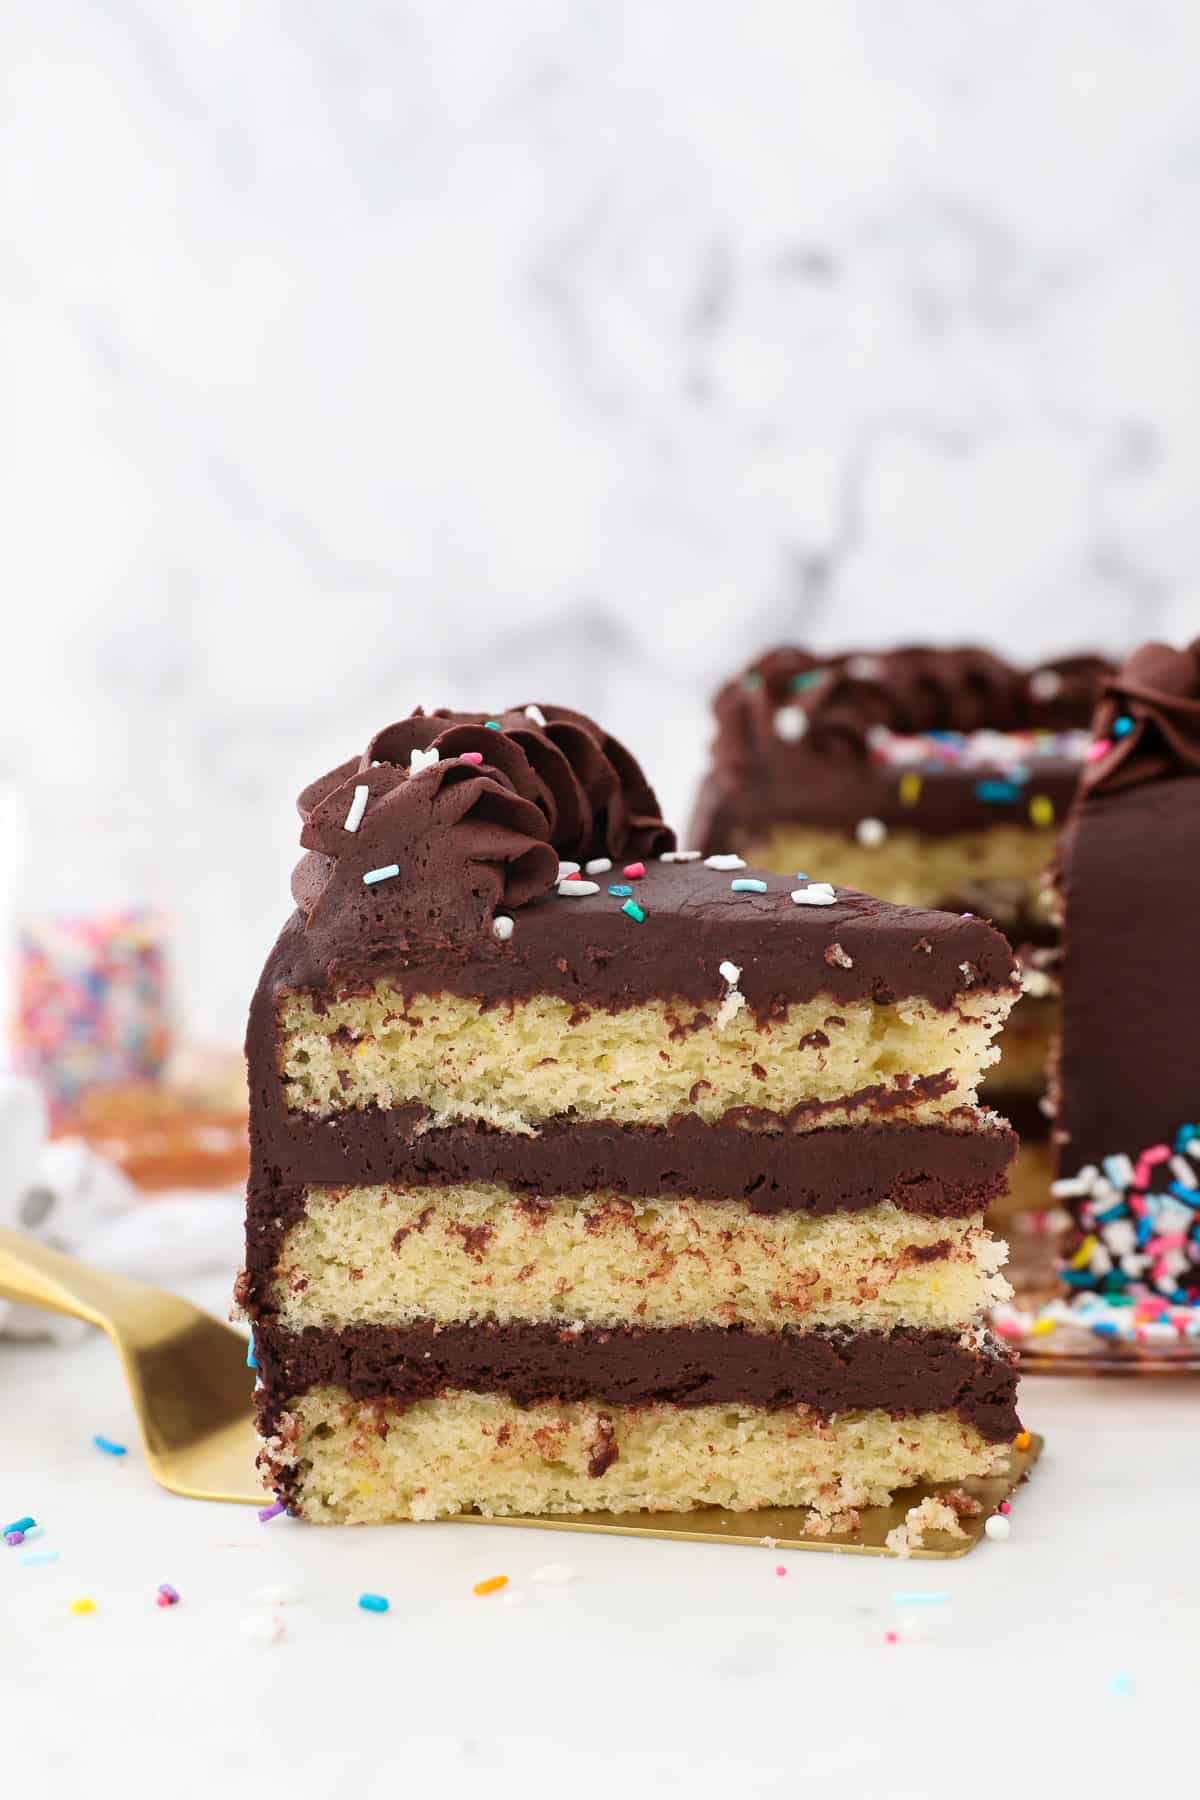 A slice of yellow layer cake with chocolate frosting.